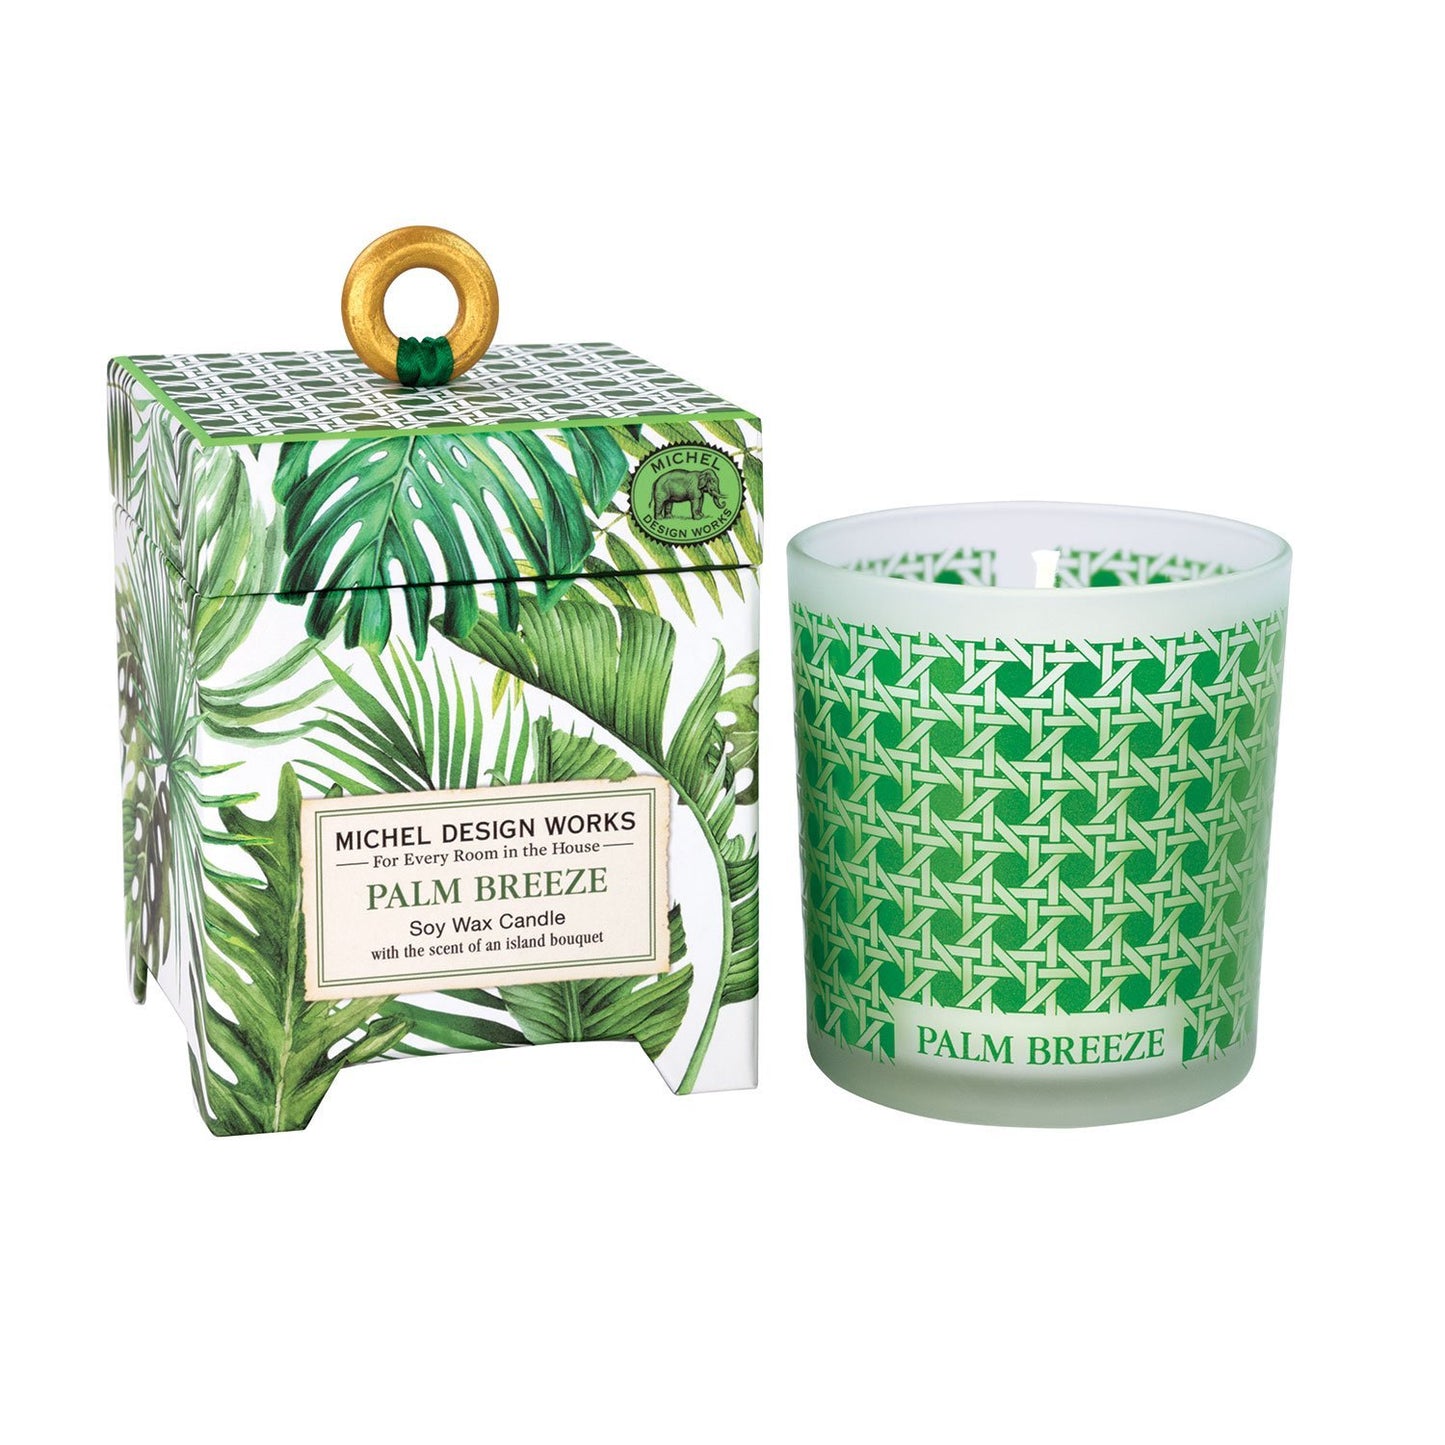 Palm Breeze Soy Wax Candle